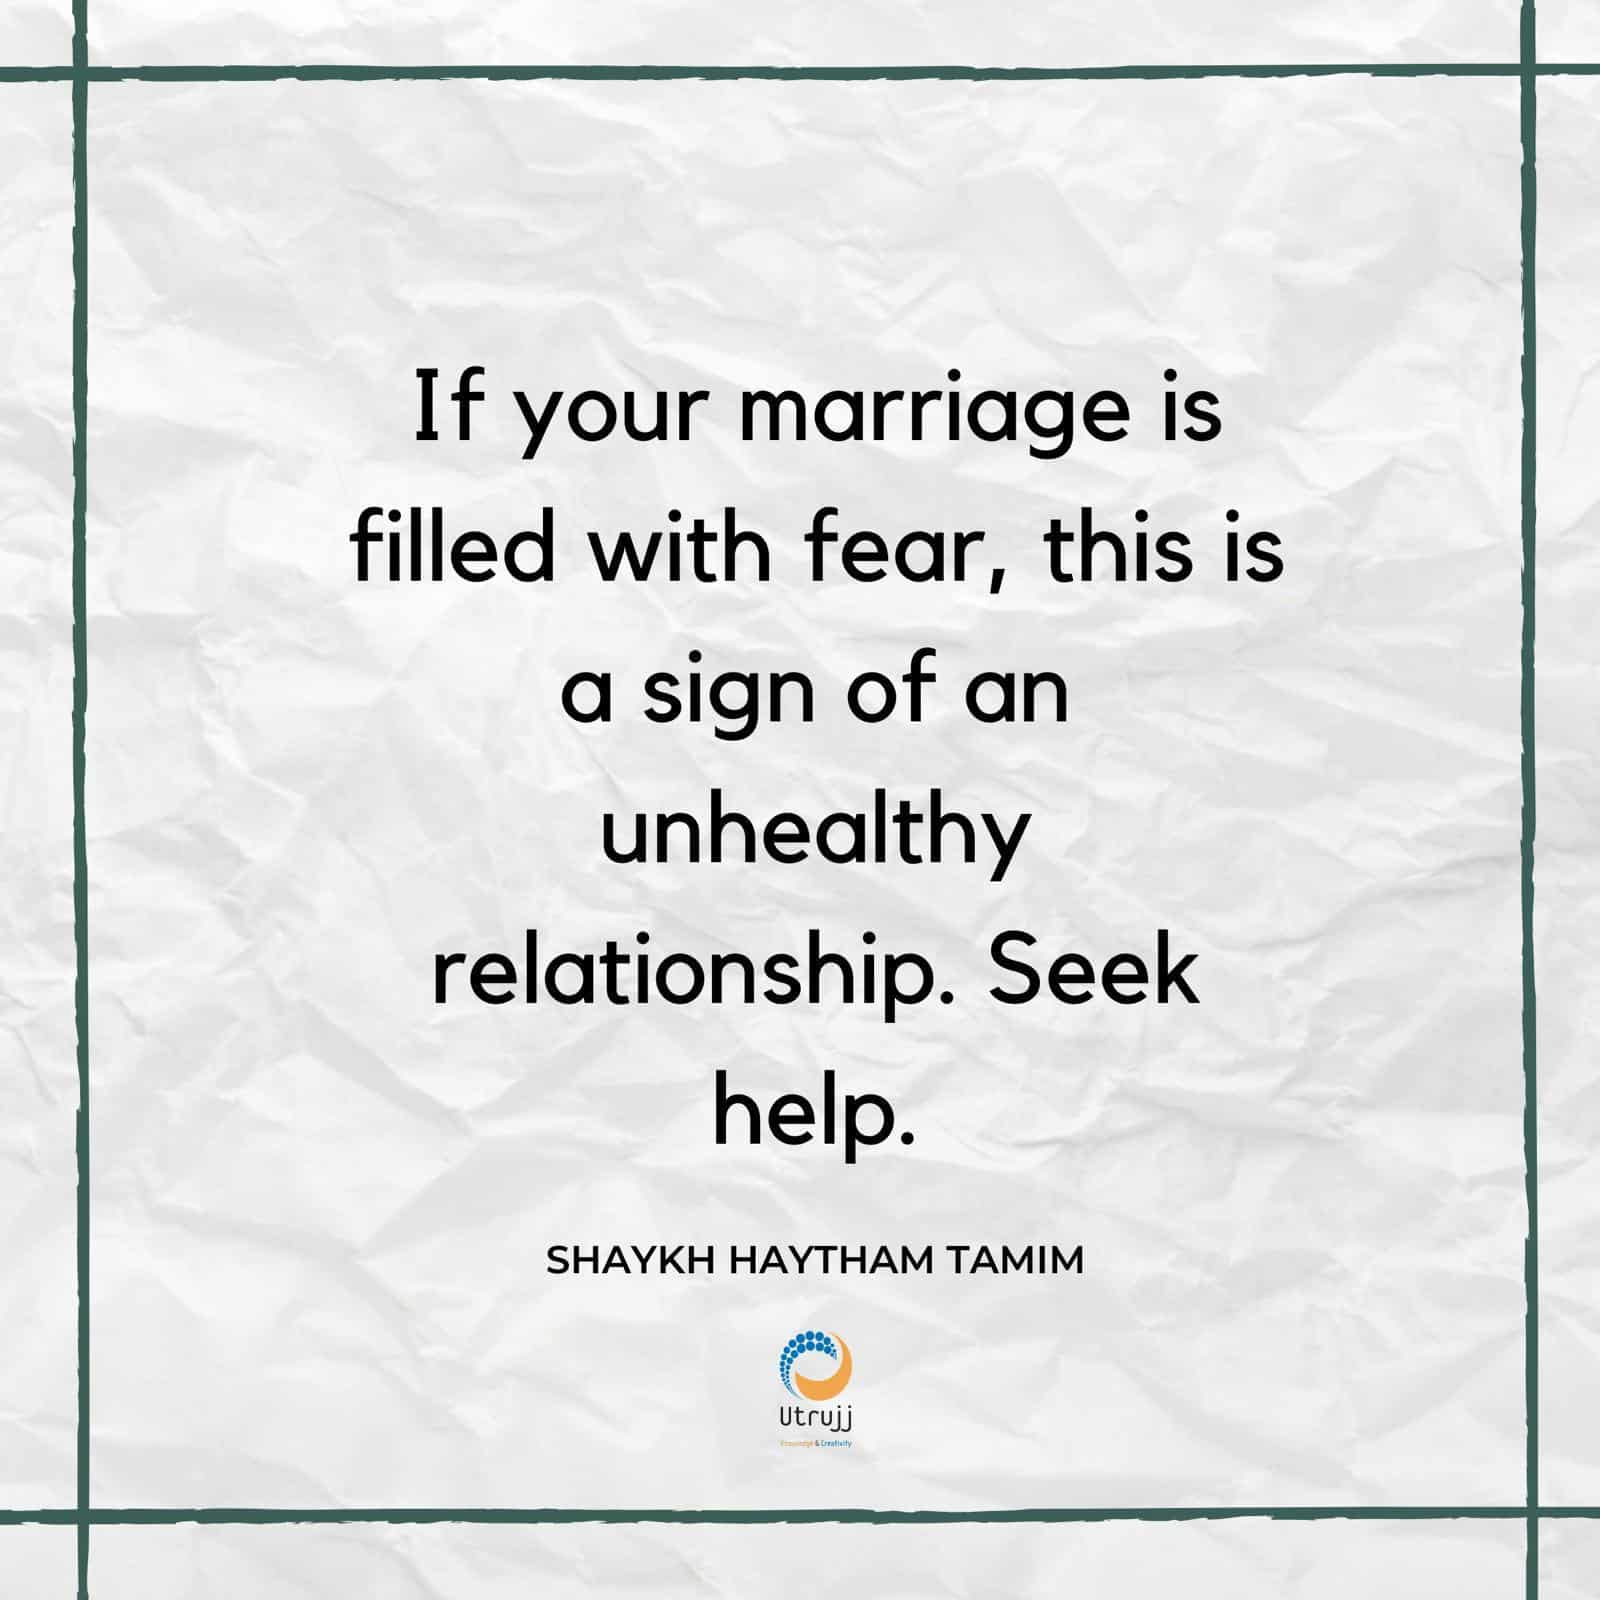 Marriage tips in islam